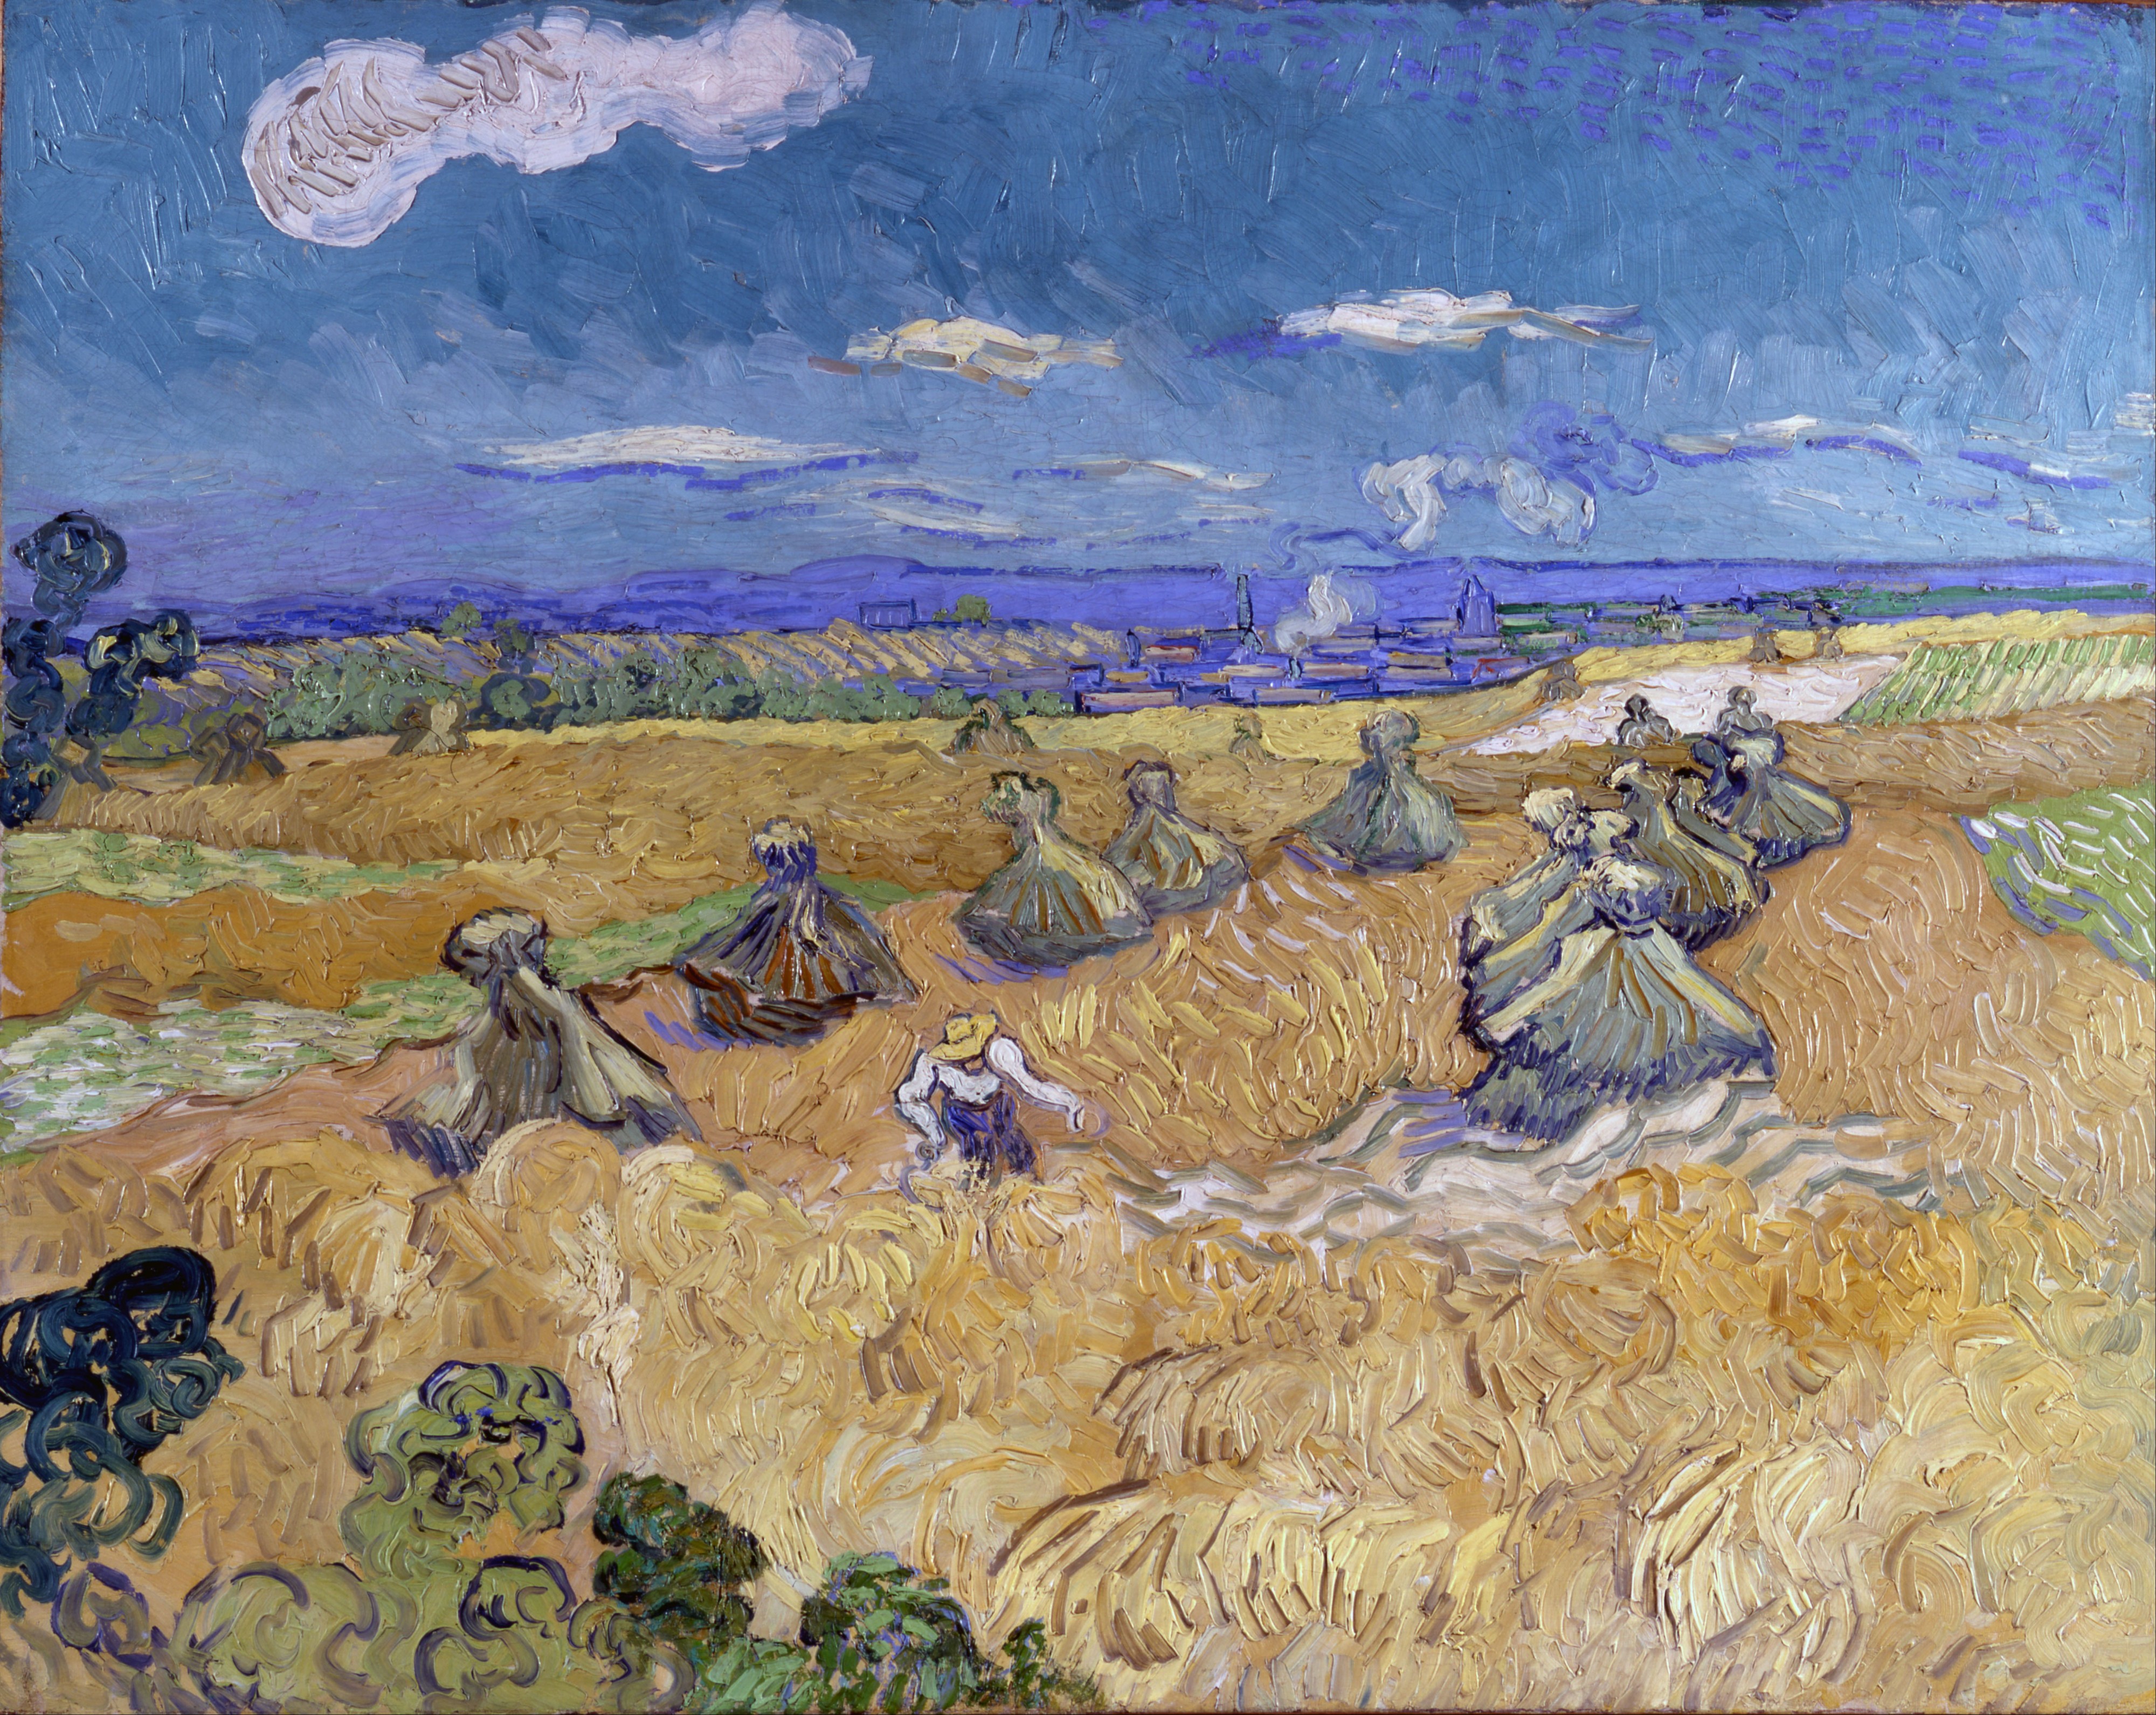 Vincent van Gogh - Wheat Fields with Reaper, Auvers - Google Art Project